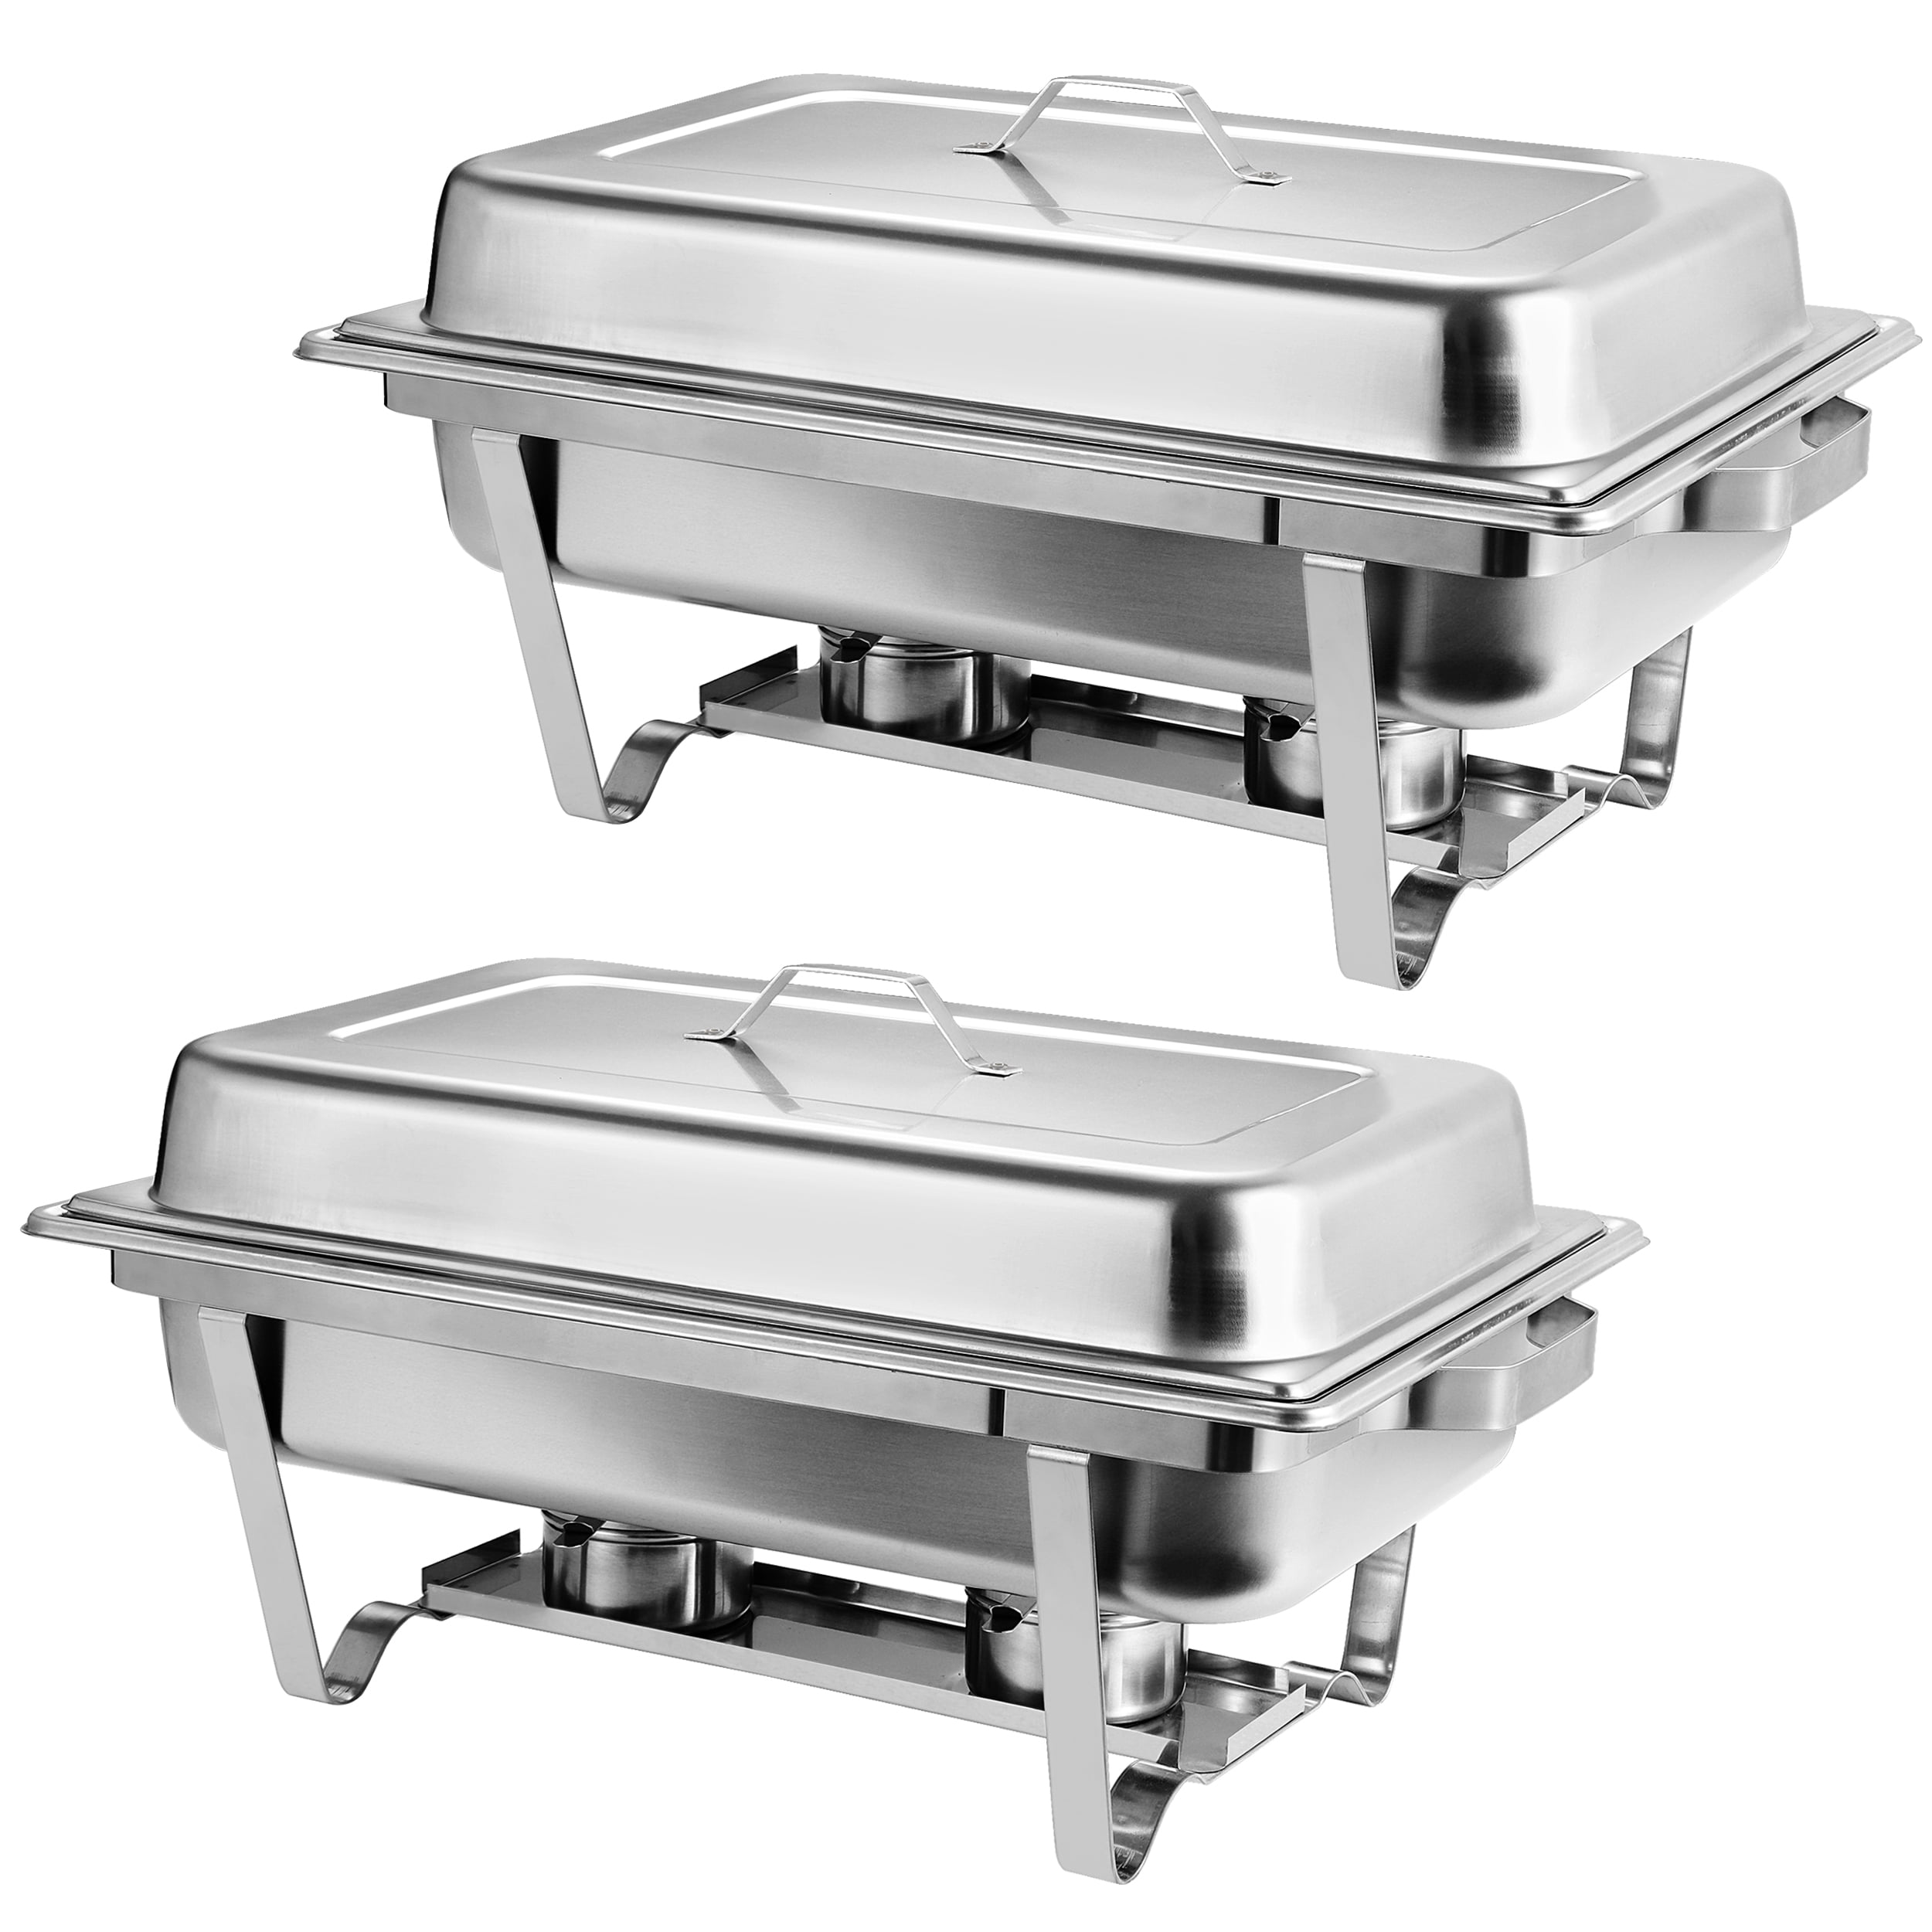 Stainless Steel Chafing Dish Full Size Chafer Dish Set 2 Pack of 8 Stainless Steel Chafing Dish Set